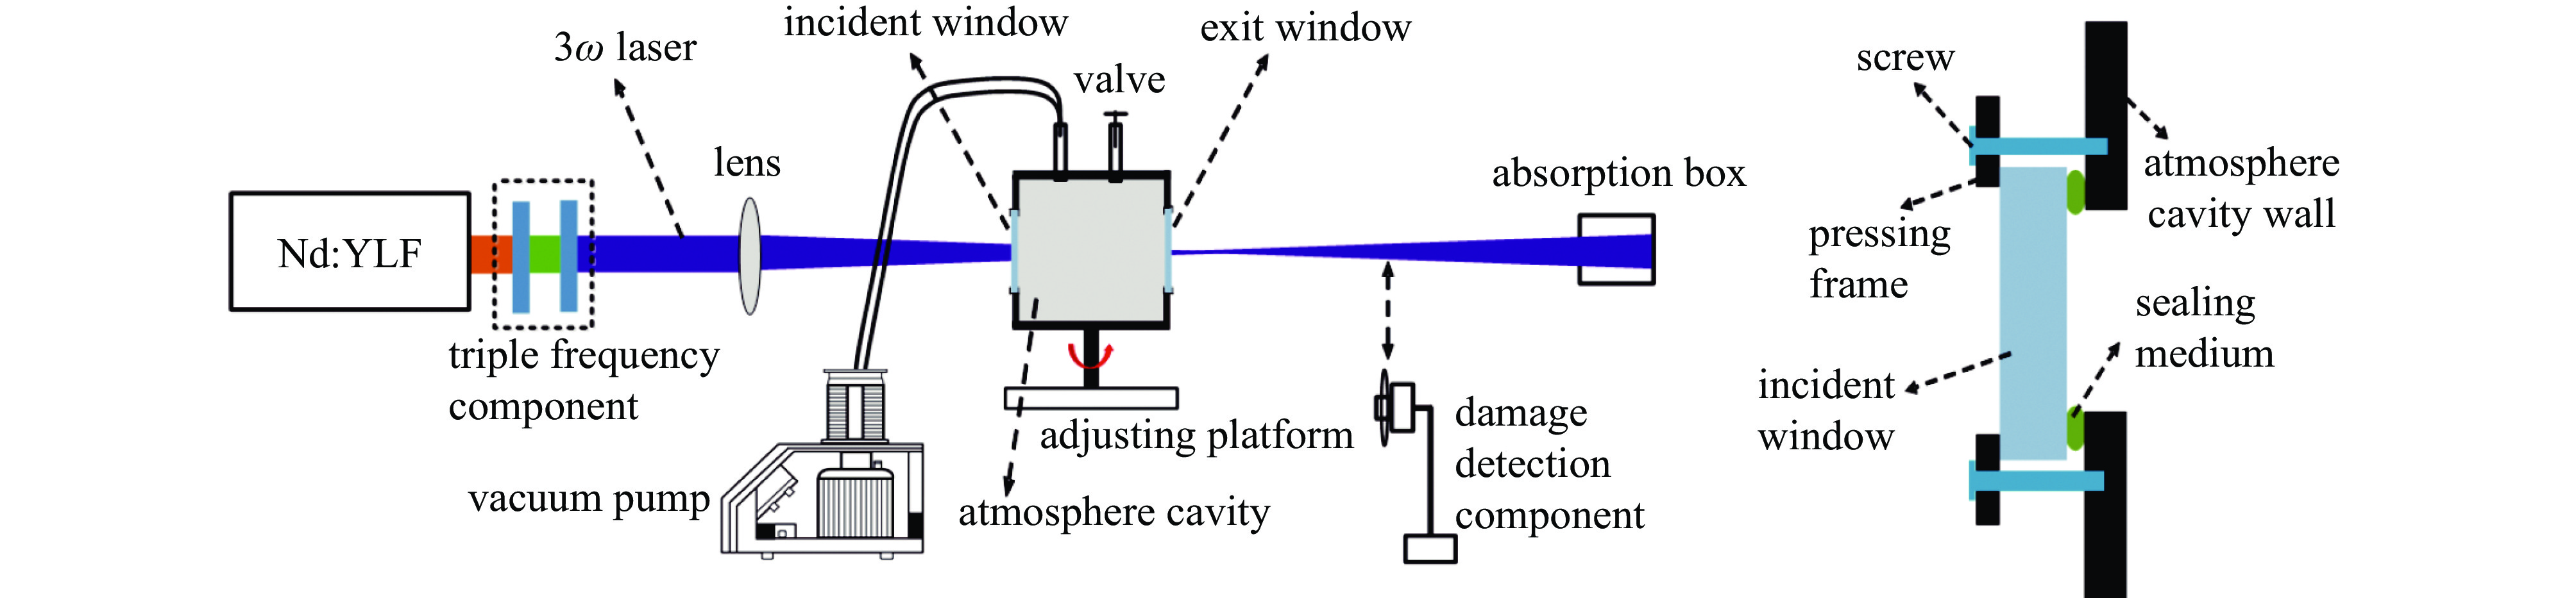 Schematic diagram of experimental setup for the VW LIDT test